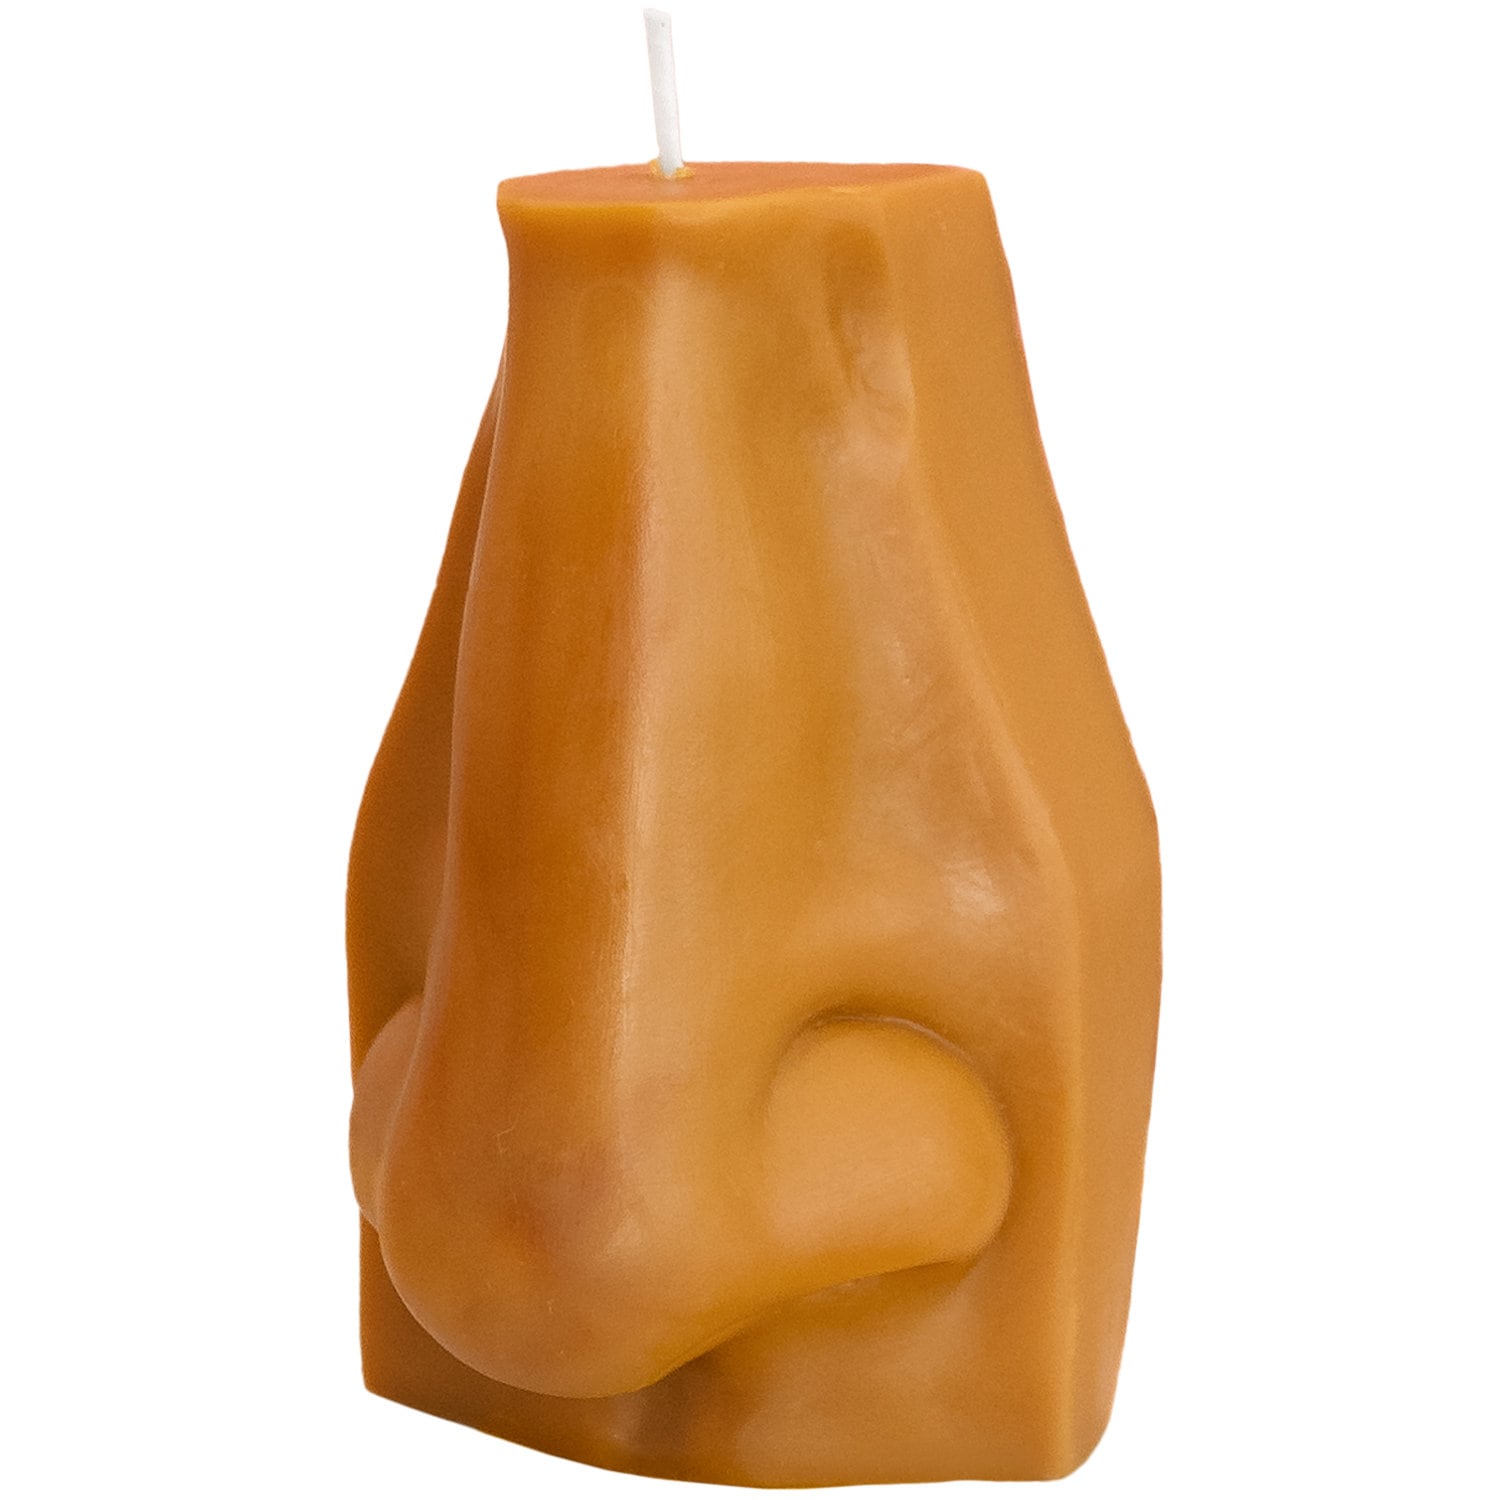 Nose Candle / Face Candle / Funny Candle / Abstract Candle / Home Decor / Unique Candle / Nice Candle